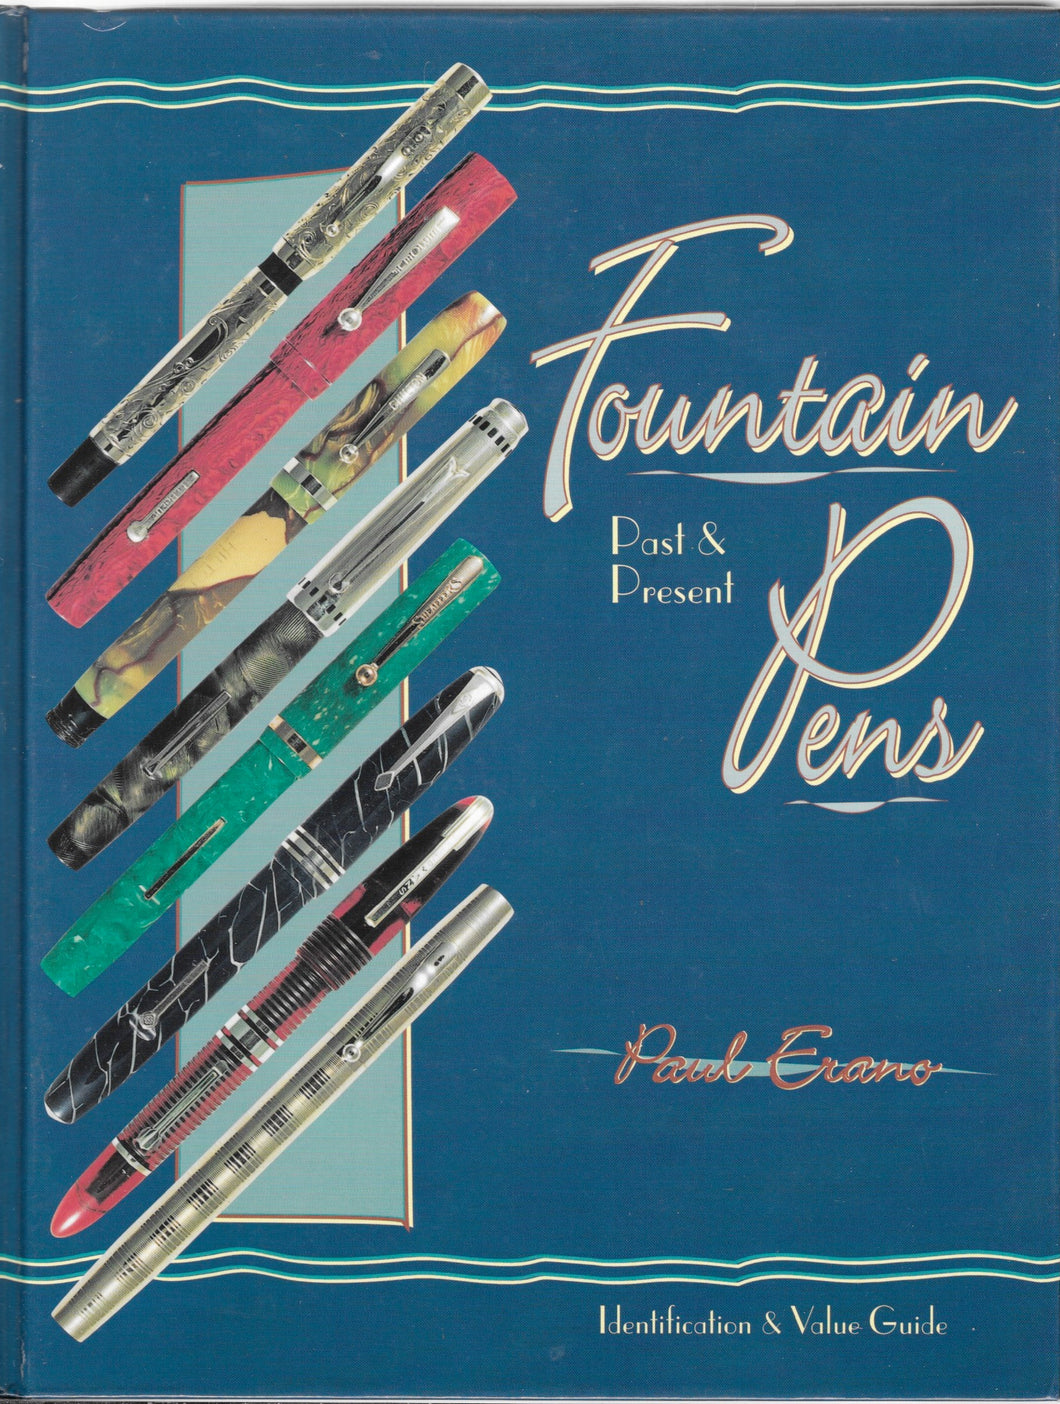 Fountain Pens Past & Present, Identification & Value Guide